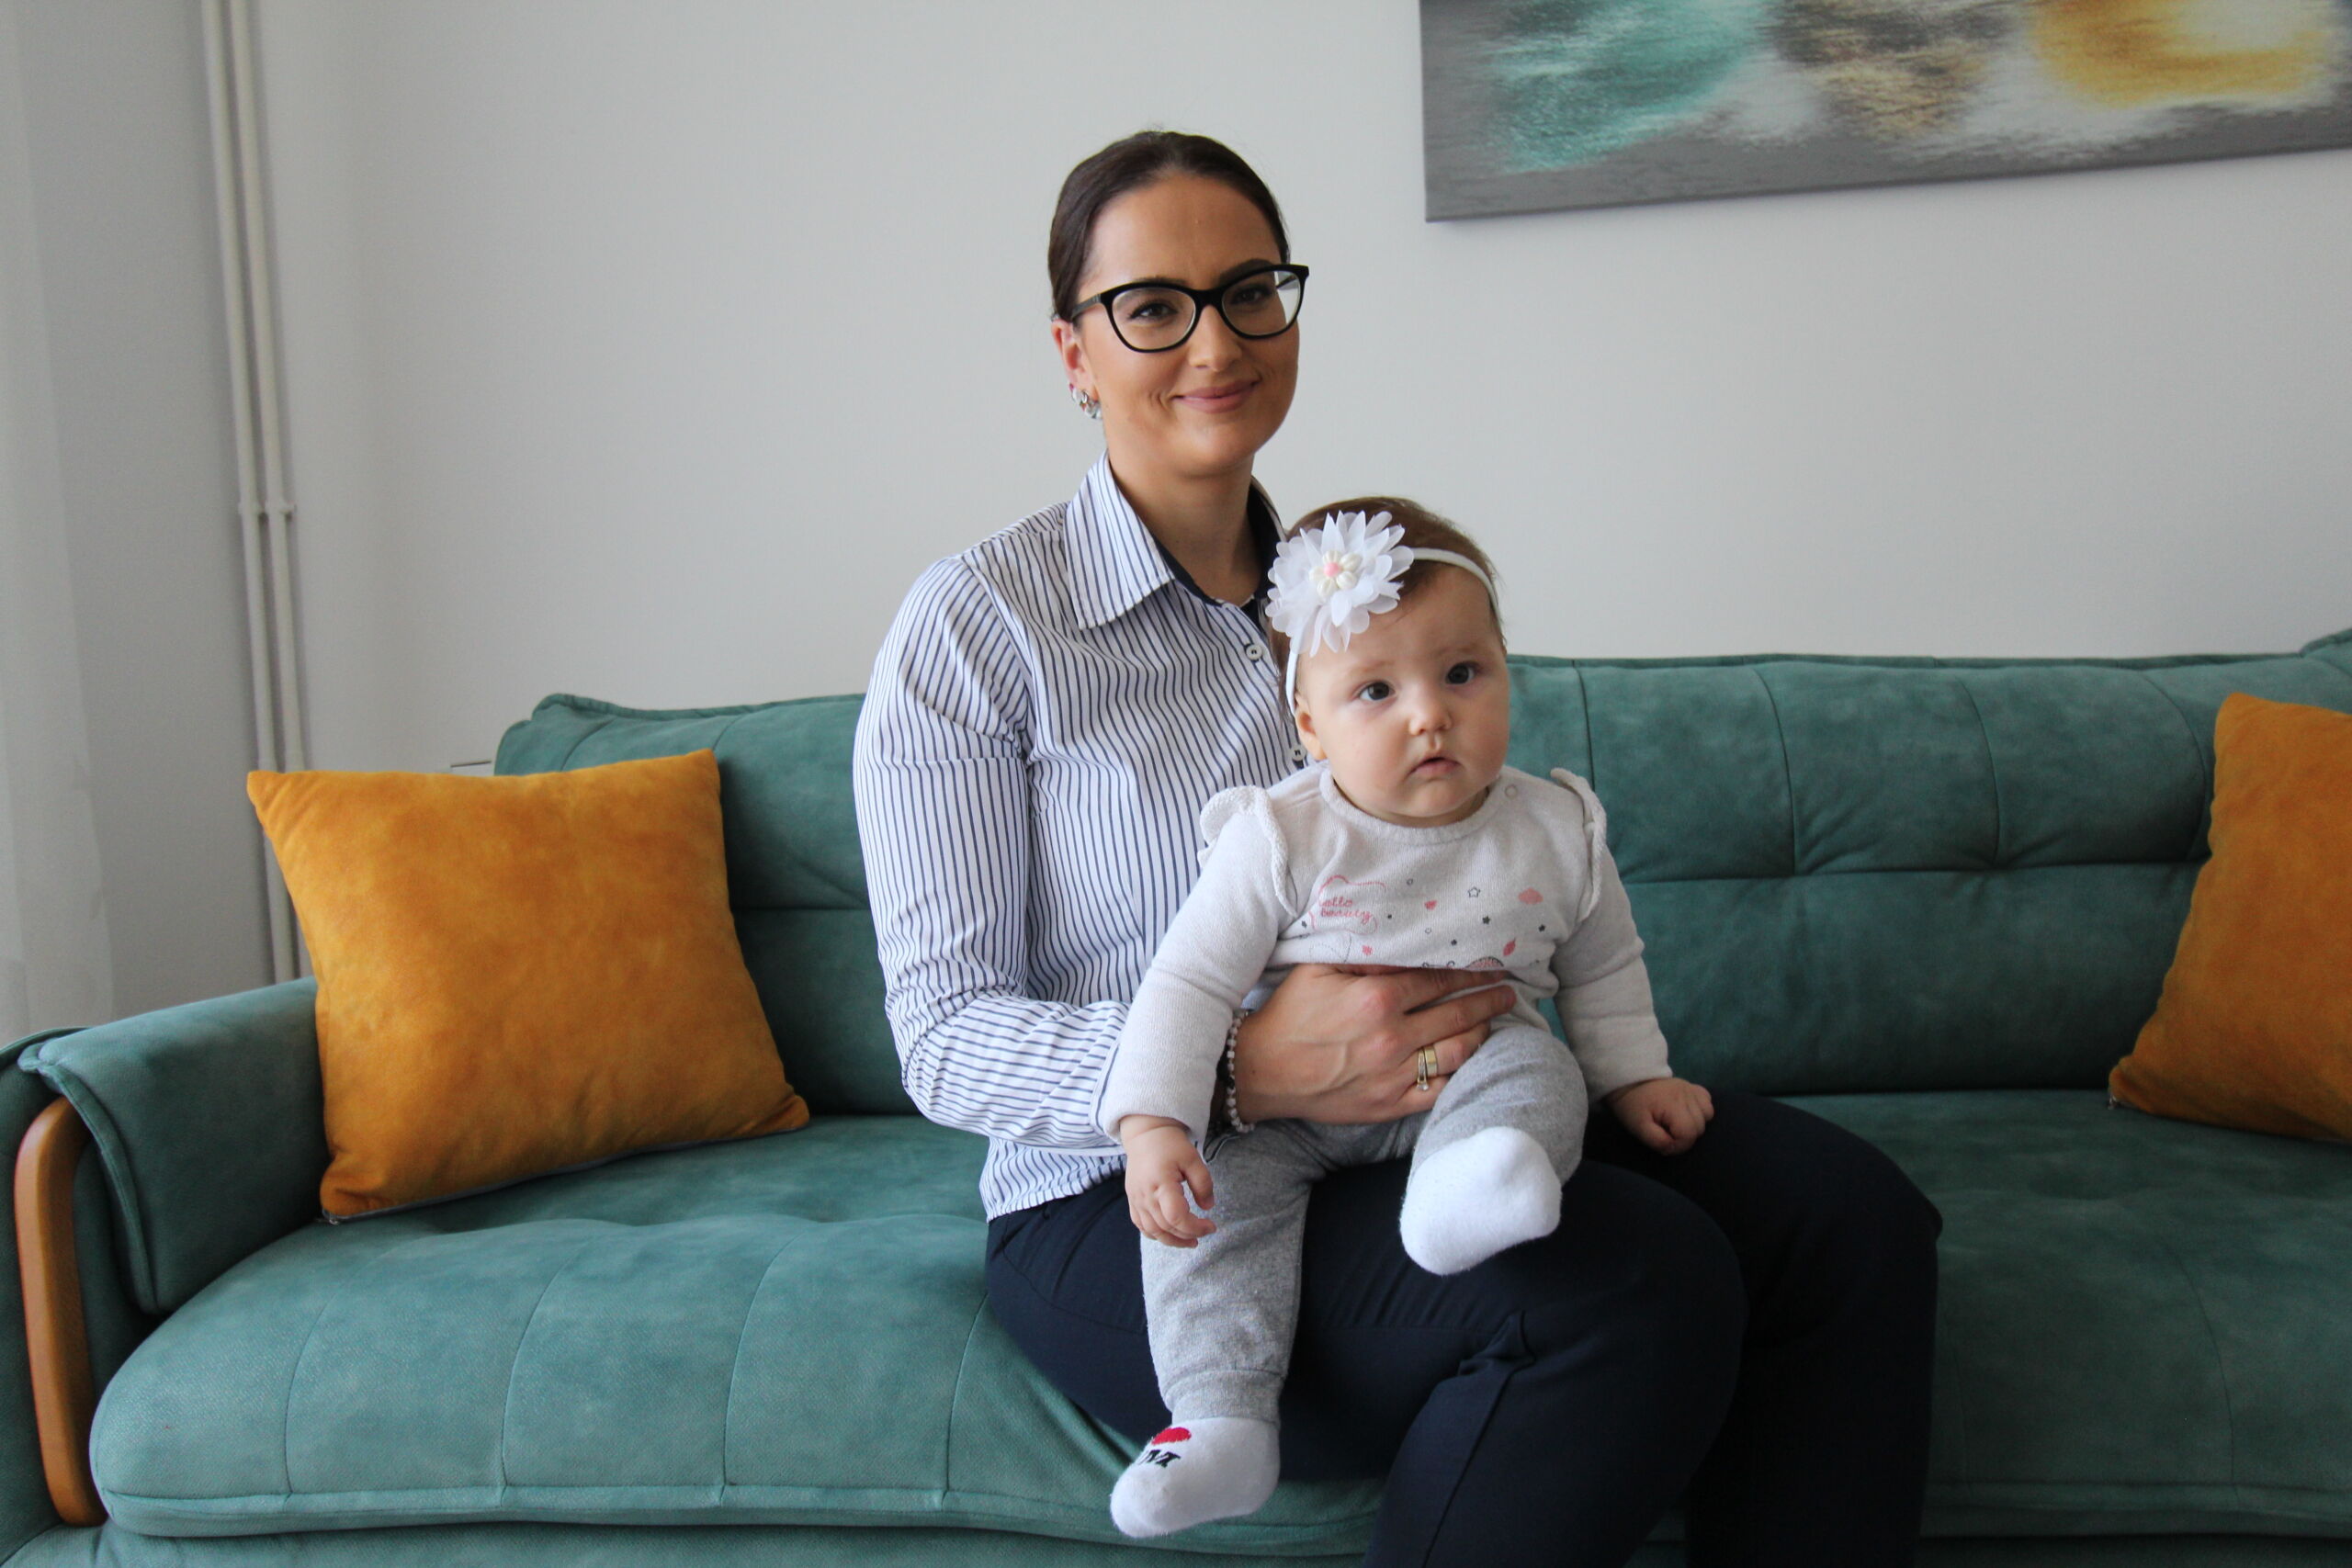 Overcoming stress and anxiety around breastfeeding: how home visiting nurses are supporting mothers on applying best practices for optimal growth of the child